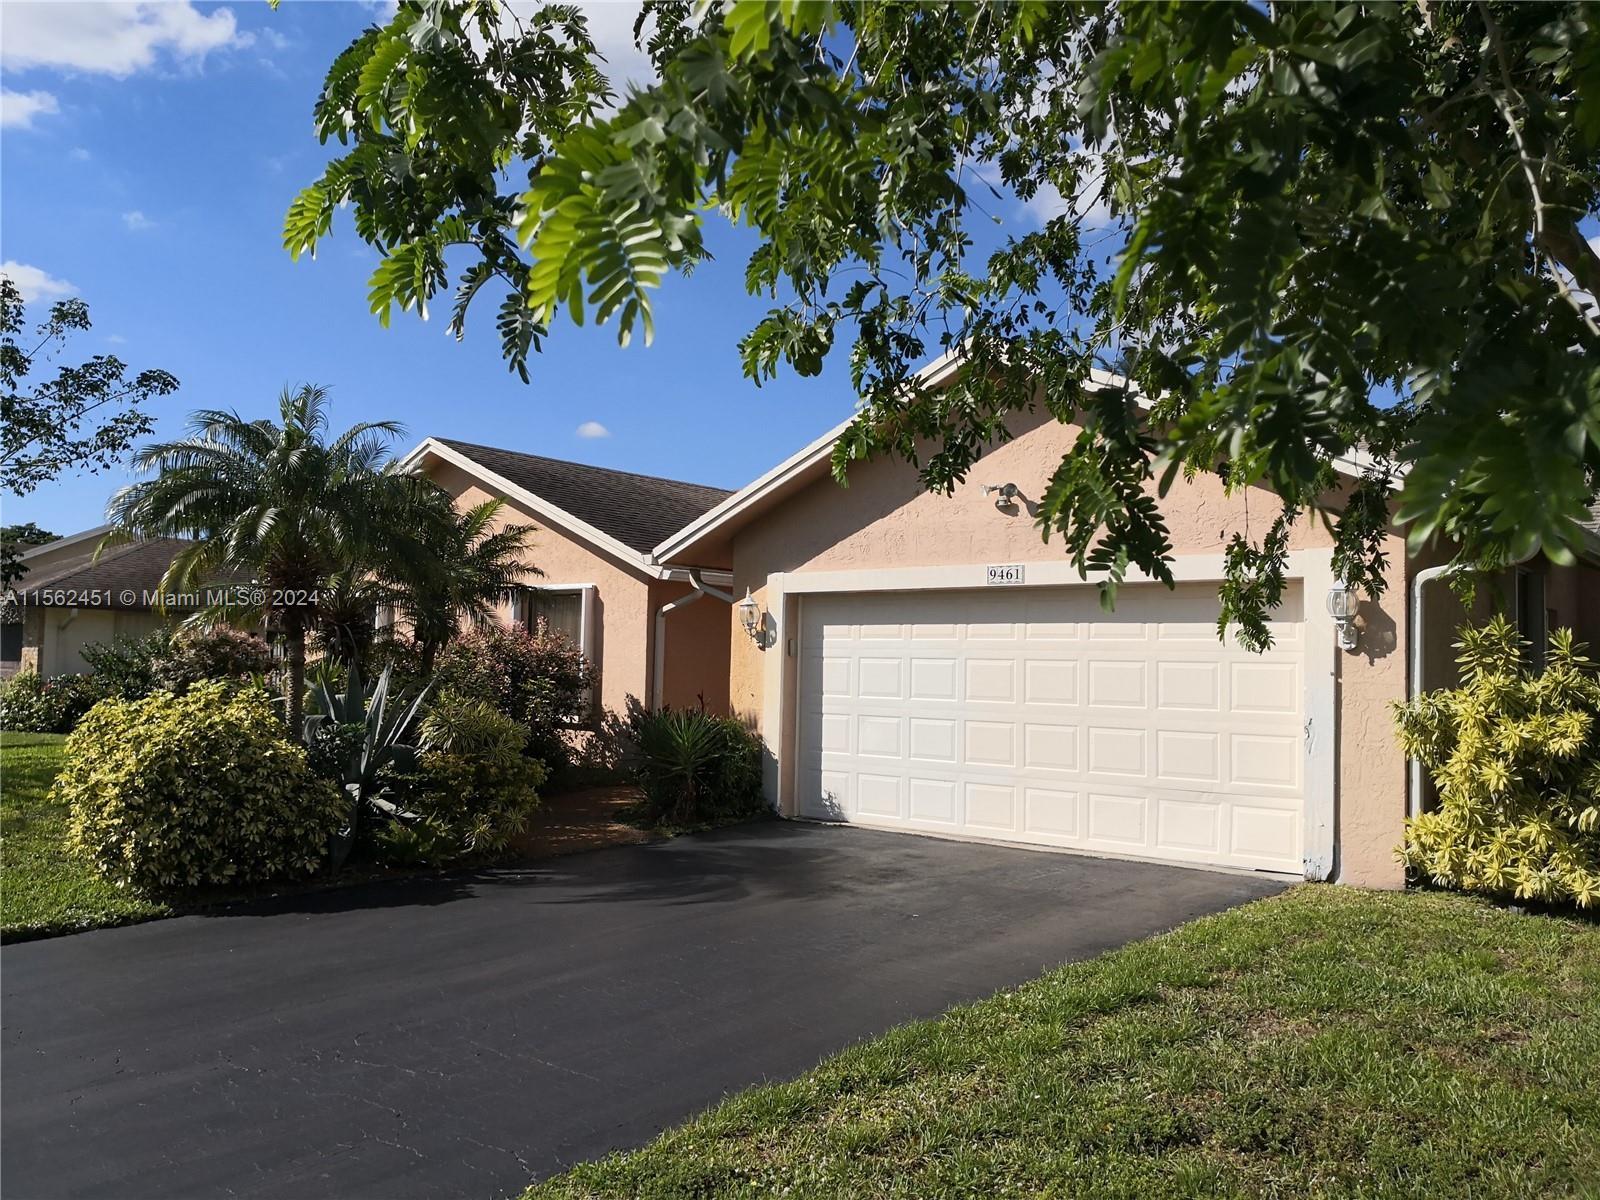 Photo of 9461 NW 16th St in Plantation, FL